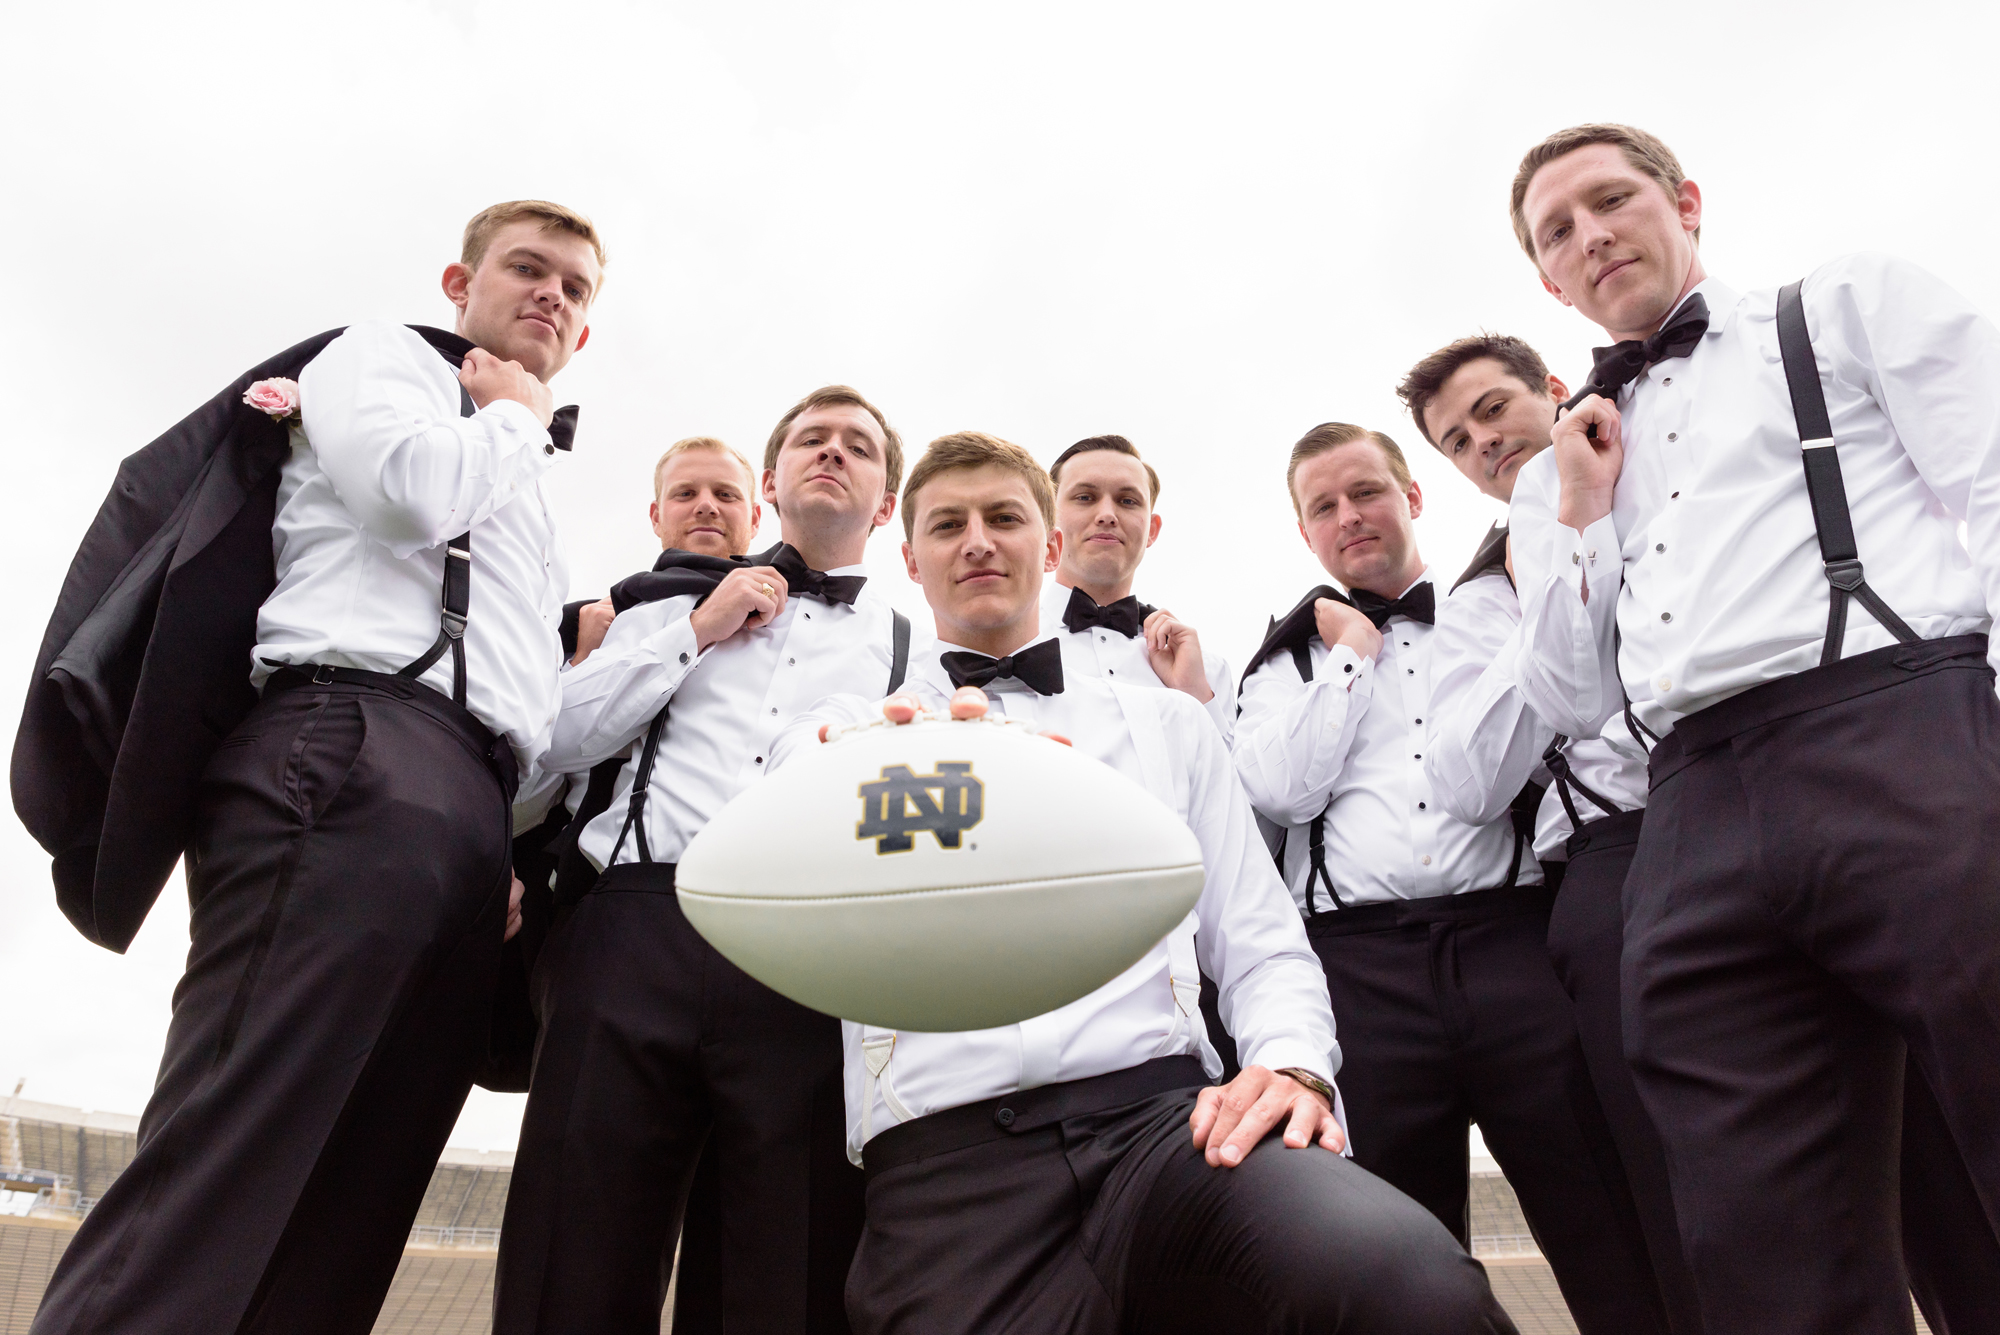 Groomsmen on Notre Dame football field after their wedding ceremony at the Basilica of the Sacred Heart on the campus of the University of Notre Dame